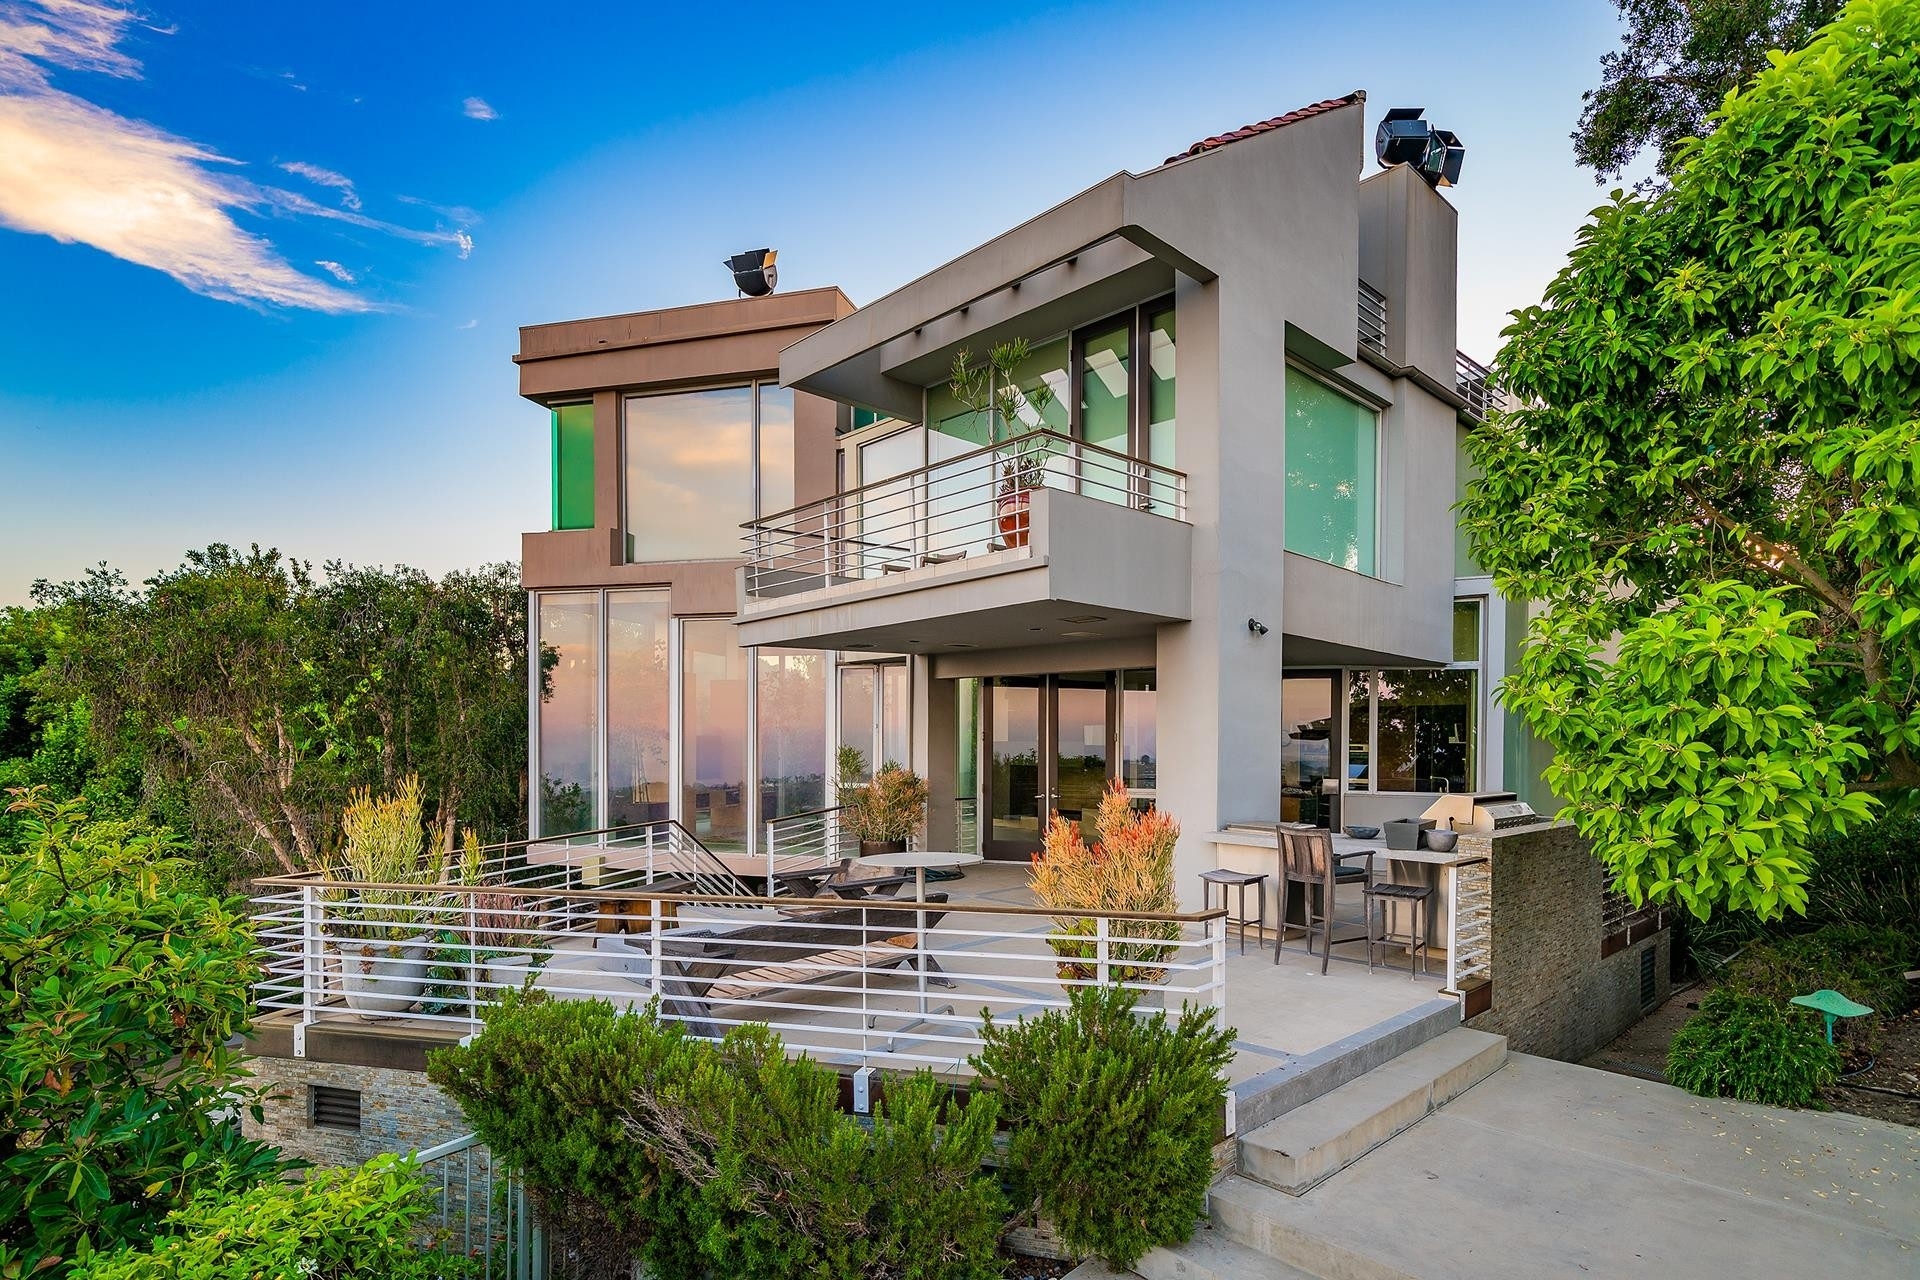 Single Family Home at Los Angeles